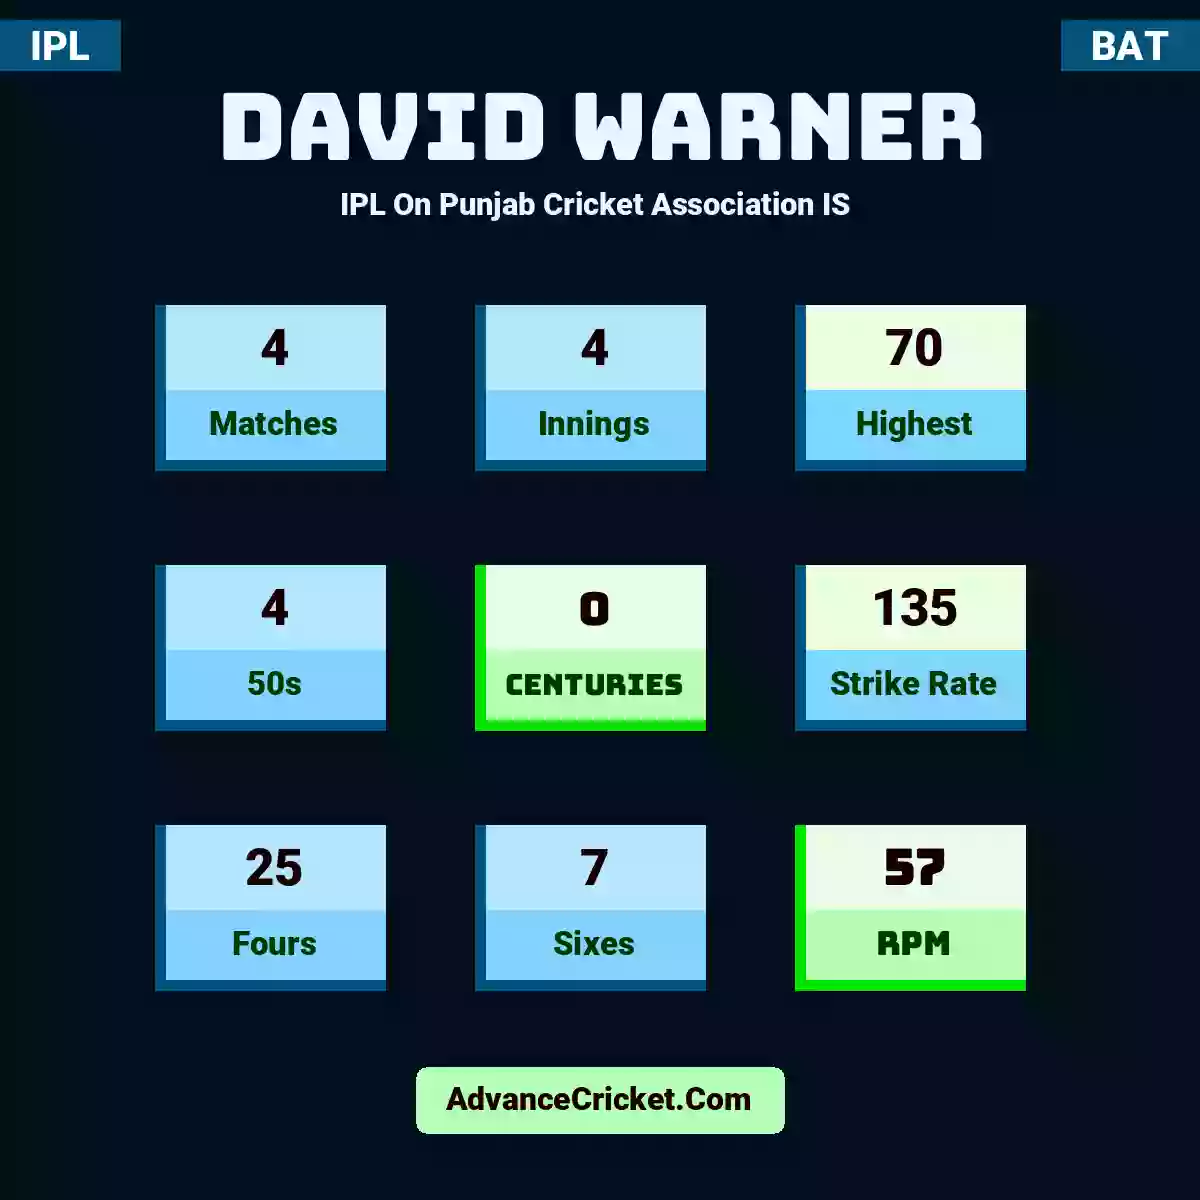 David Warner IPL  On Punjab Cricket Association IS , David Warner played 4 matches, scored 70 runs as highest, 4 half-centuries, and 0 centuries, with a strike rate of 135. D.Warner hit 25 fours and 7 sixes, with an RPM of 57.